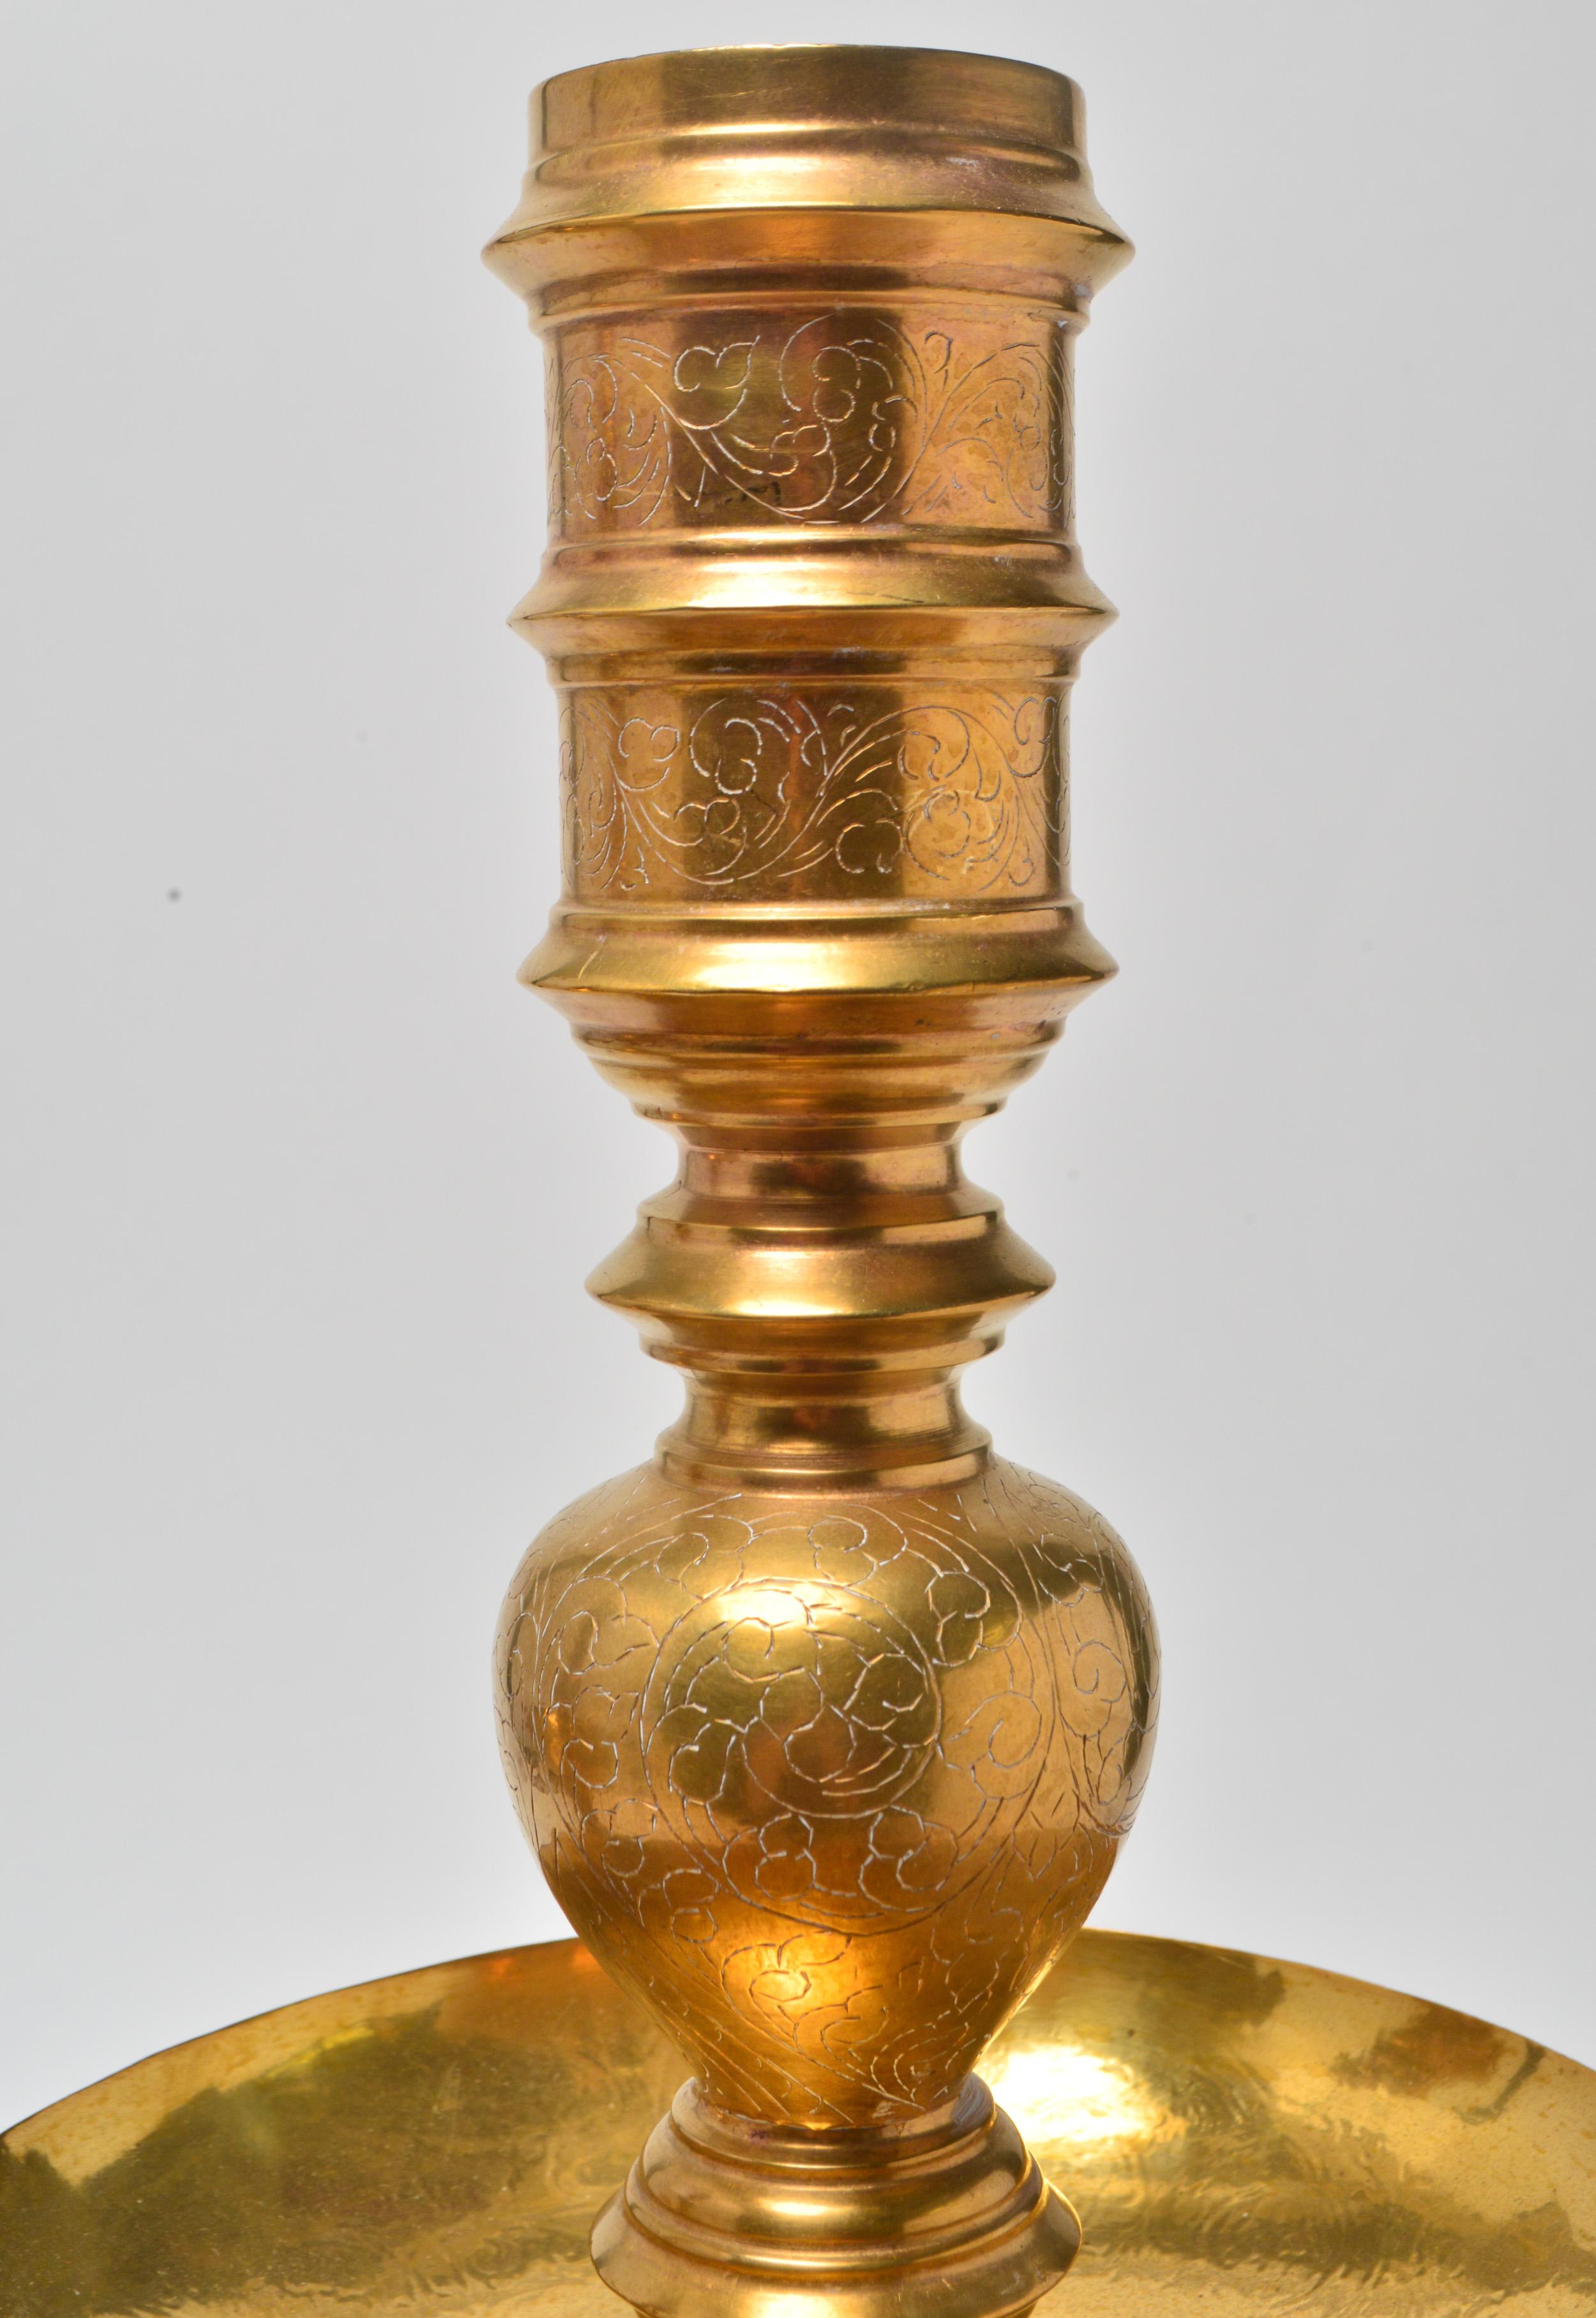 Indian pair of large engraved brass candlesticks with a large central bobeche each. The pair is in great vintage condition with age-appropriate wear.